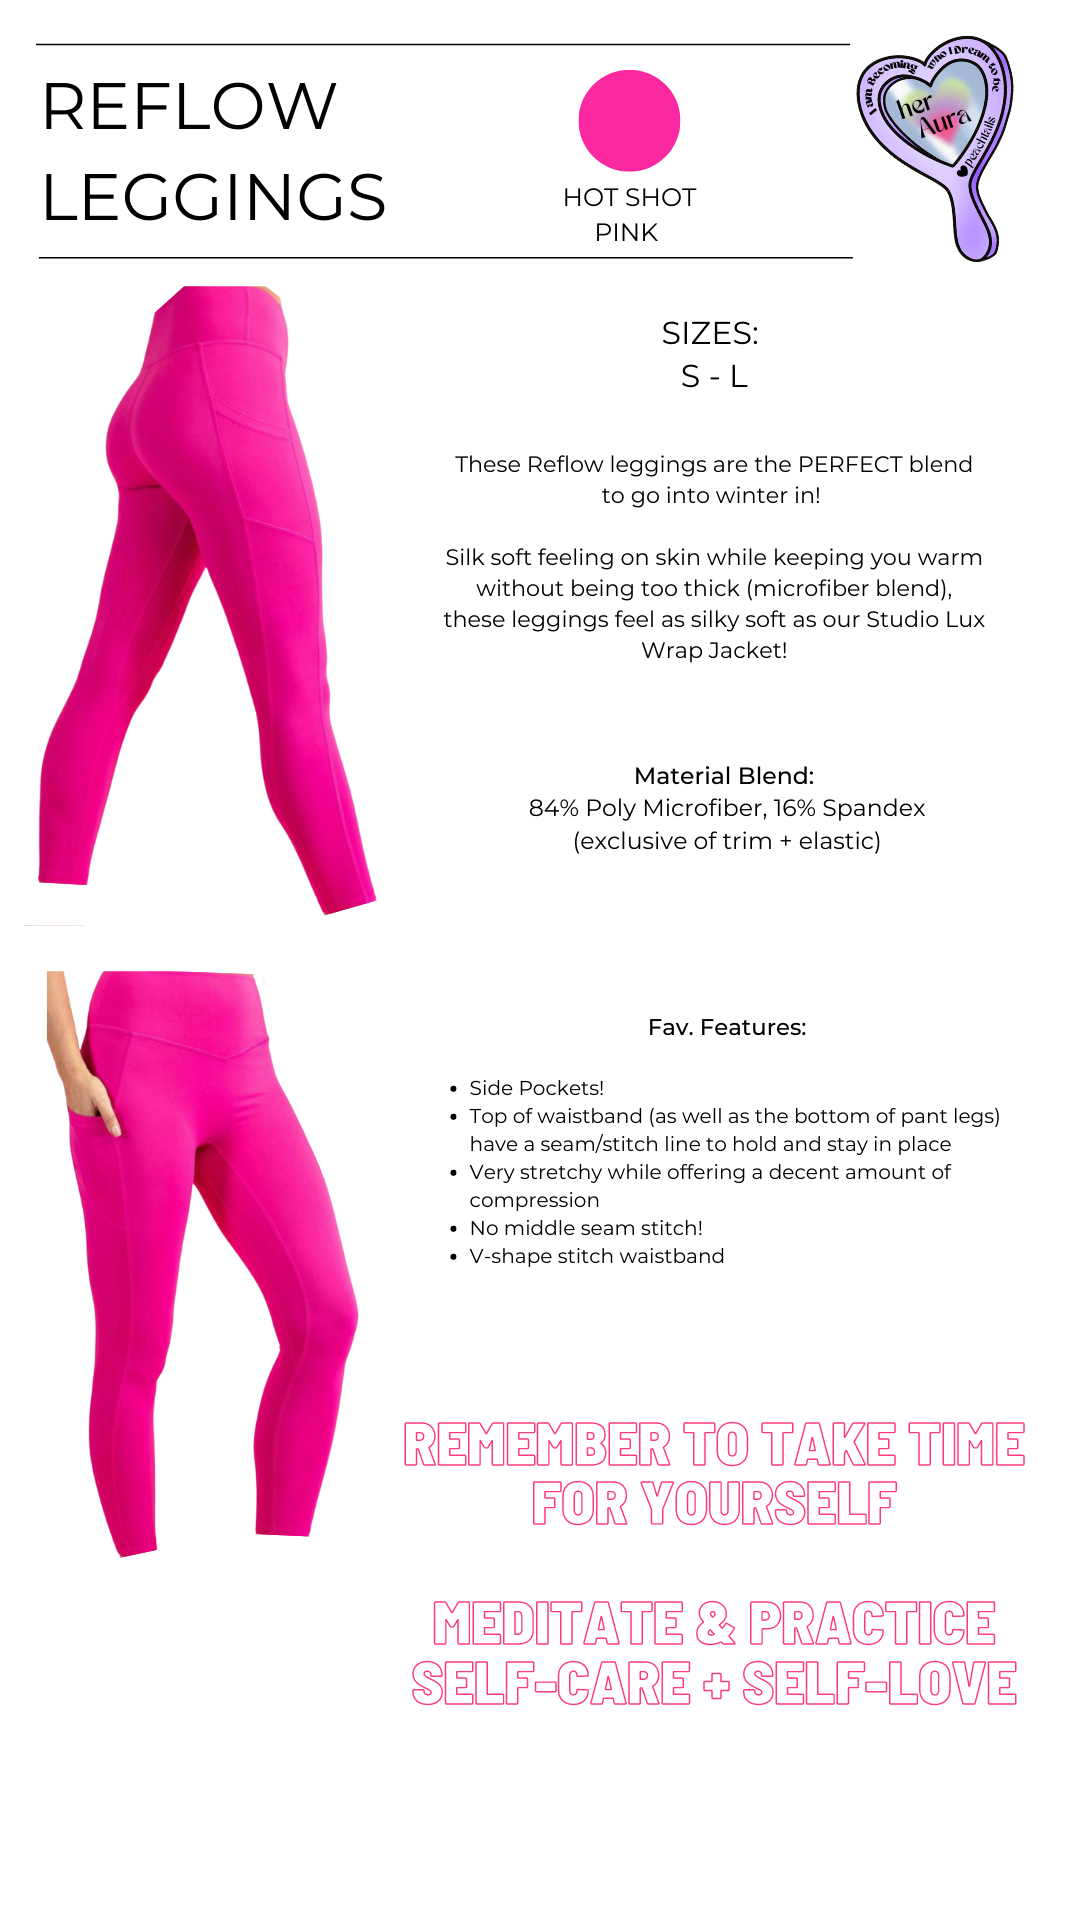 The image is an advertisement for "REFLOW LEGGINGS" in hot shot pink, available in sizes S - L. The leggings feature a material blend of 84% Poly Microfiber and 16% Spandex, with favorite features like side pockets, top of waistband grip, very stretchy fabric, comfortable stitching, no middle seam itch, and a V-shape waistband. The ad encourages self-care with reminders to "take time for yourself" and "meditate & practice self-care & self-love." Images show the leggings from multiple angles.